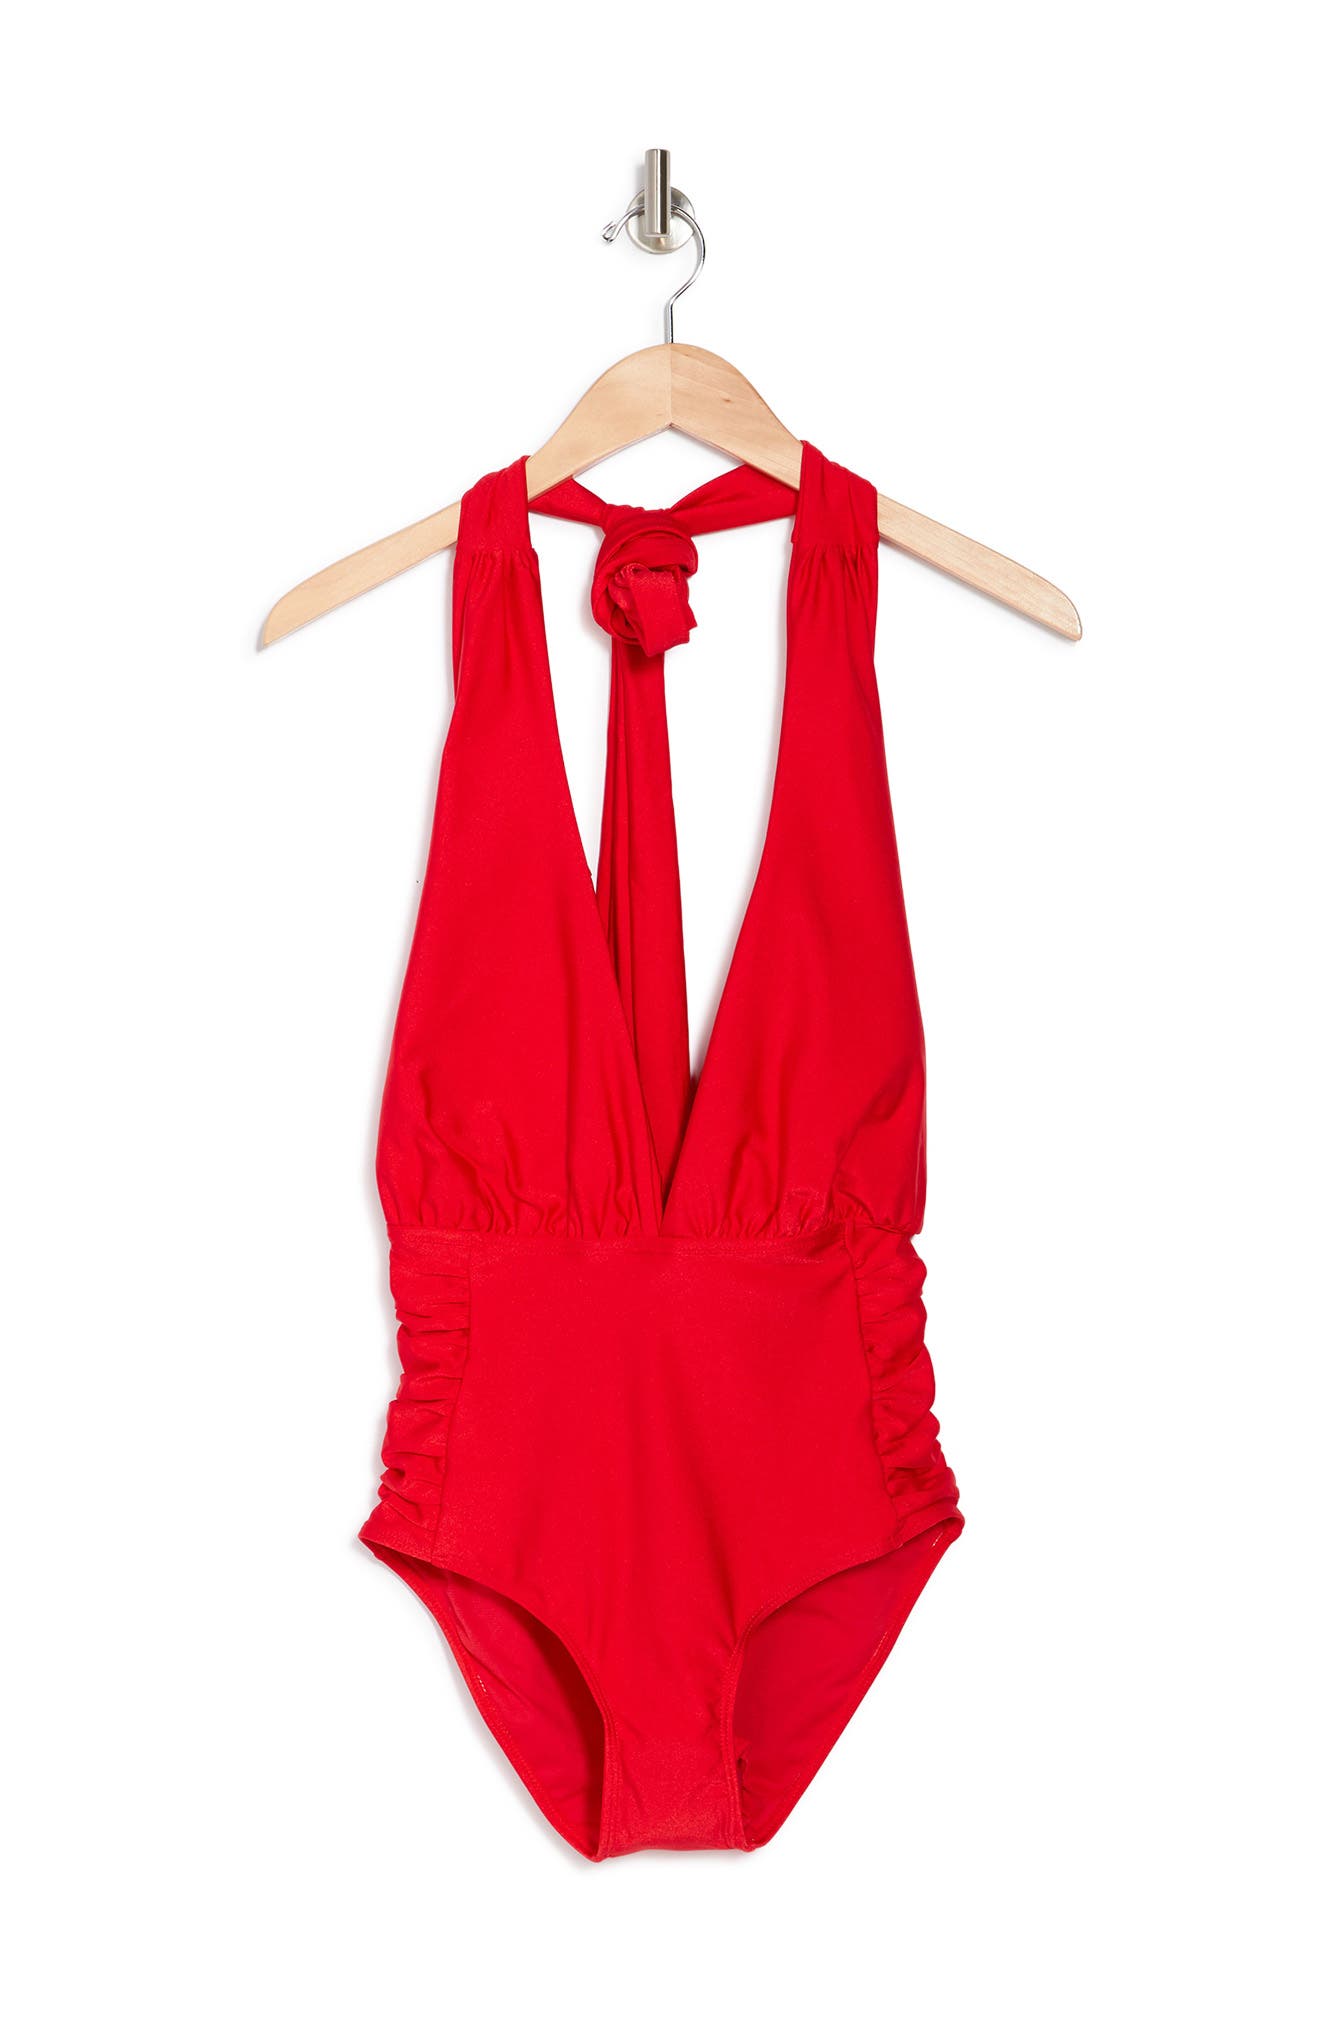 Nicole Miller Convertible One-piece Swimsuit In High Risk Red